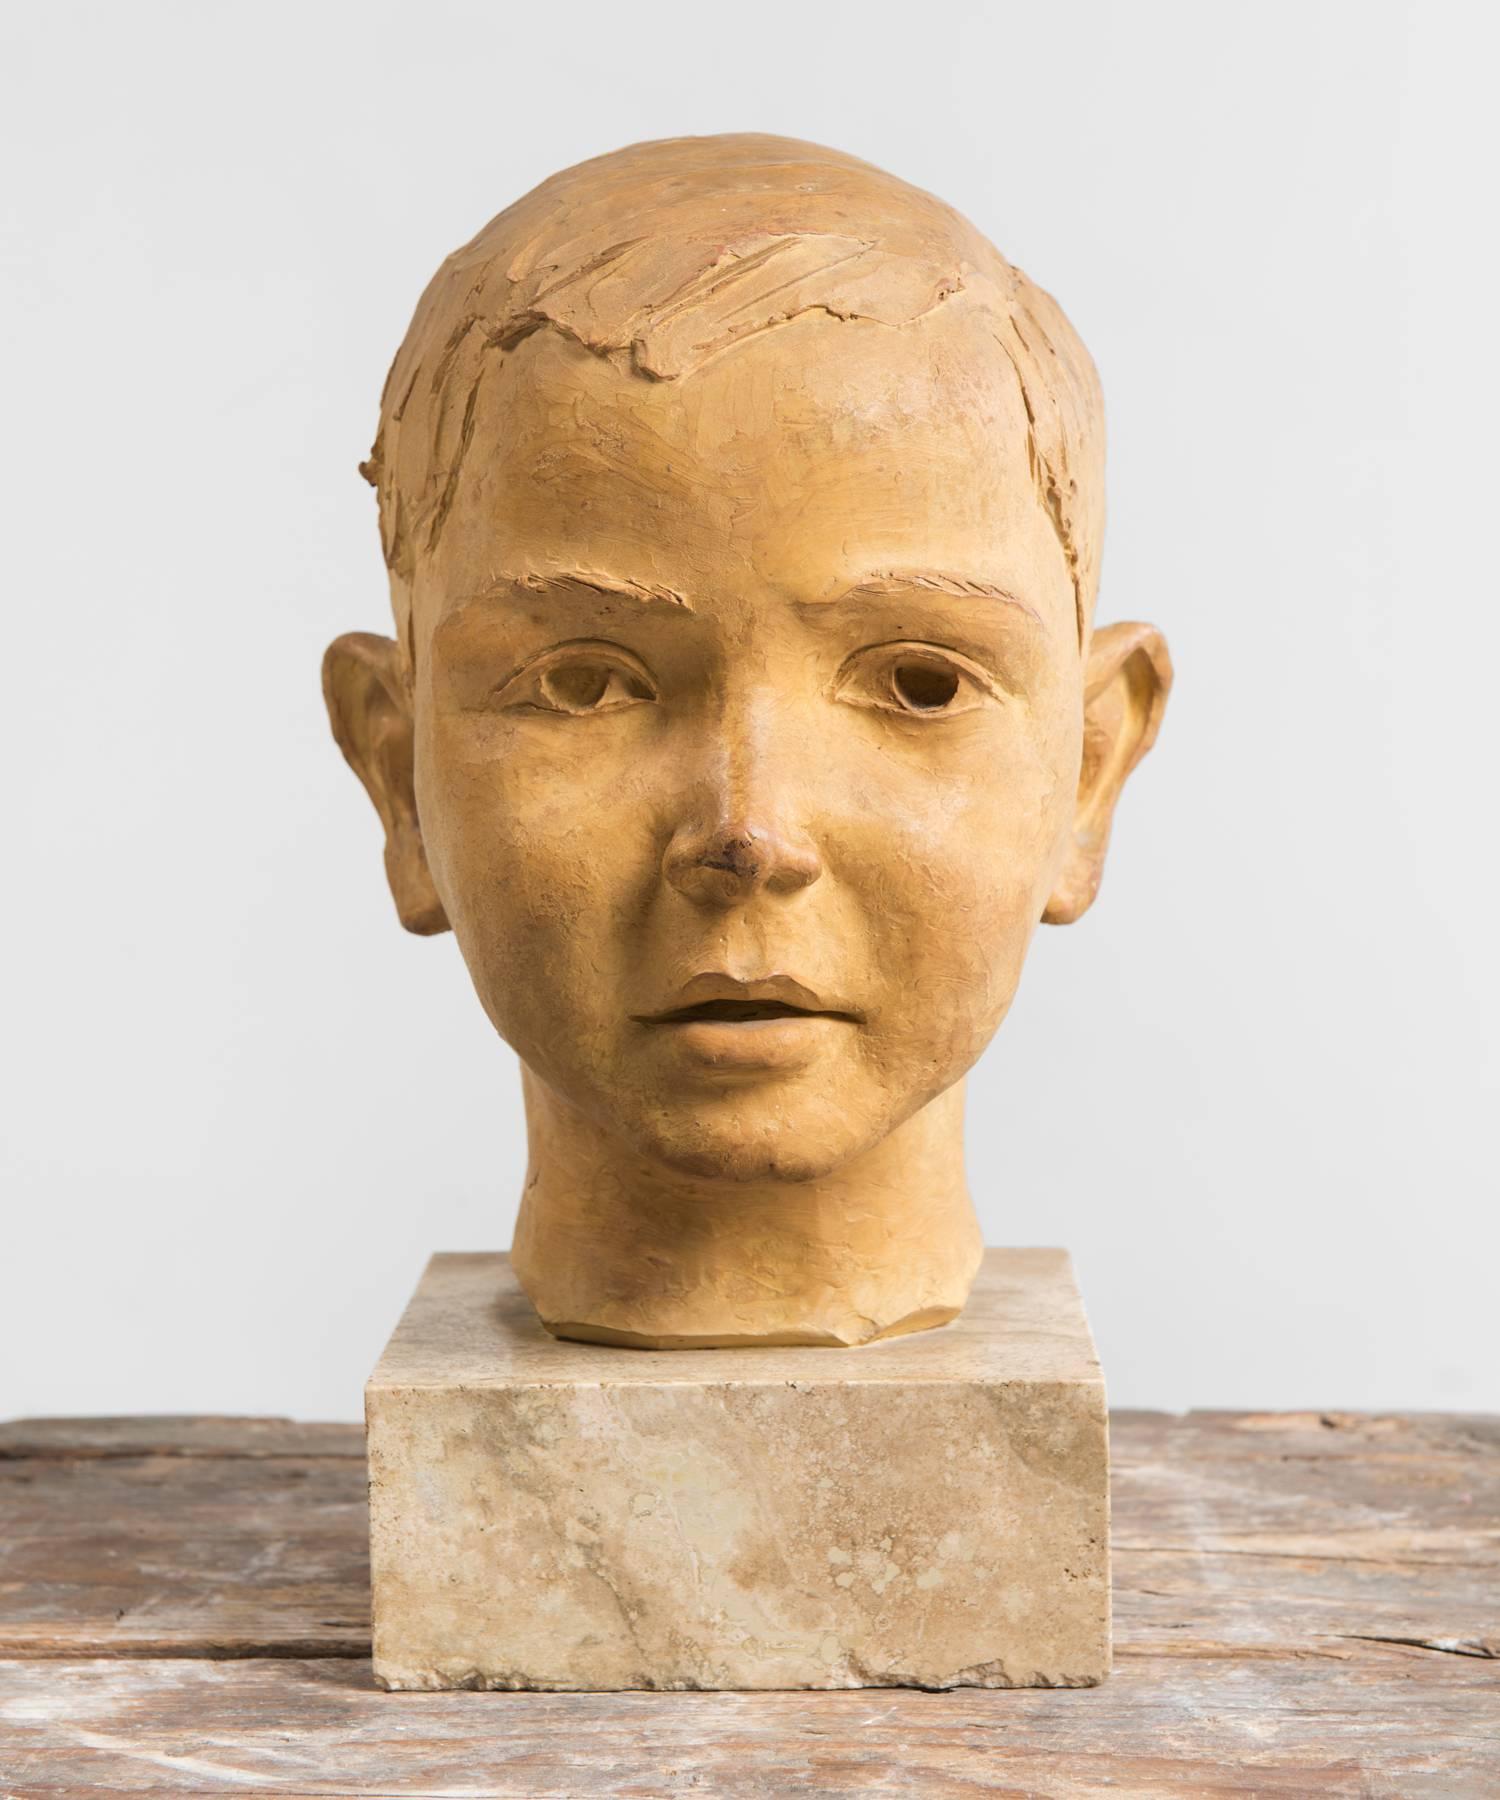 Terracotta bust of a youth, made in Italy, circa 1950.

Sculpture of a boy's head on stone pedestal with artist's signature.